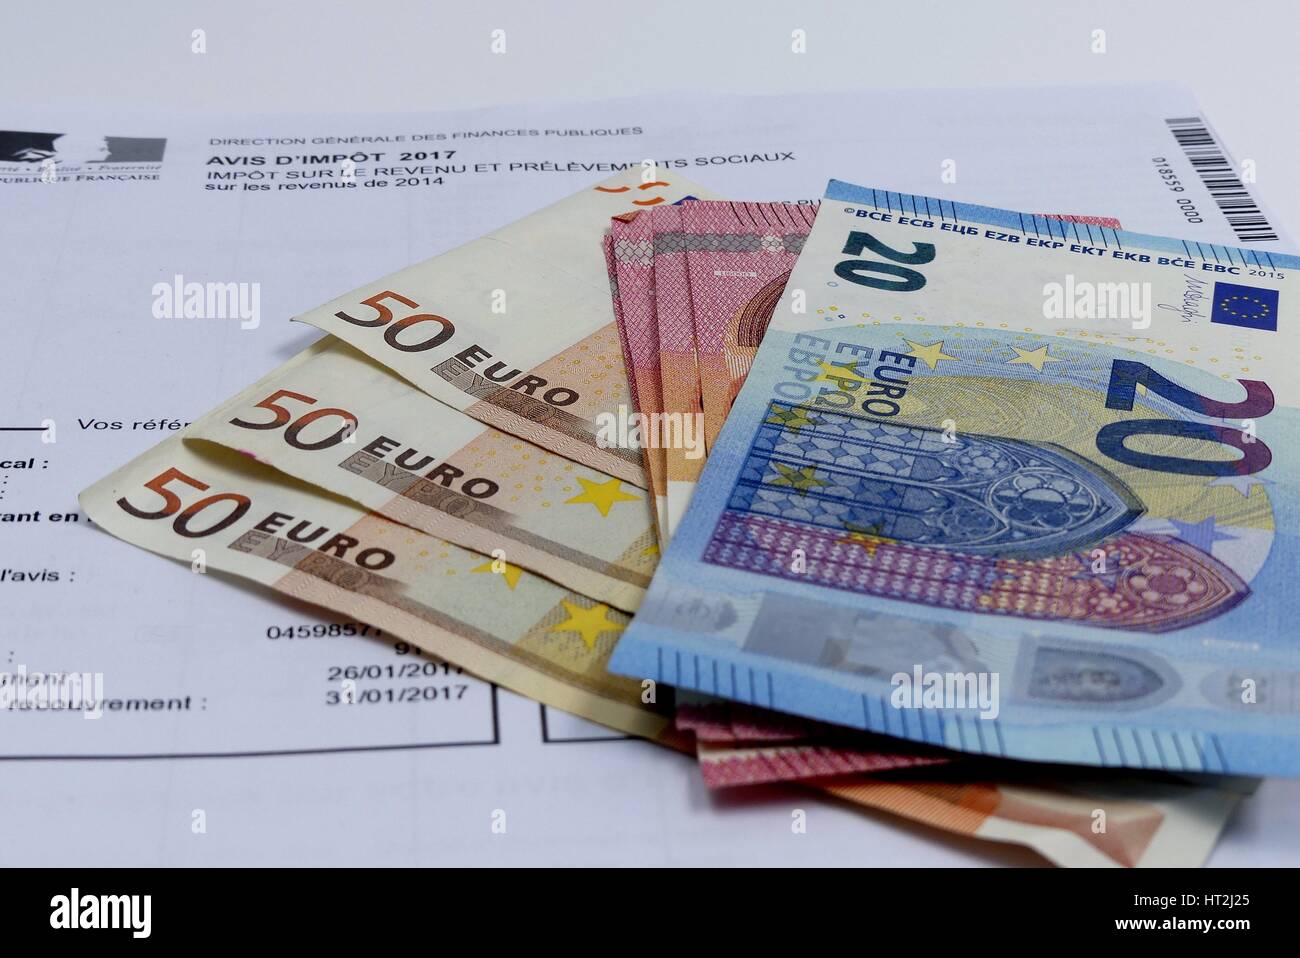 French tax form and euros bank notes. Financial concept Stock Photo